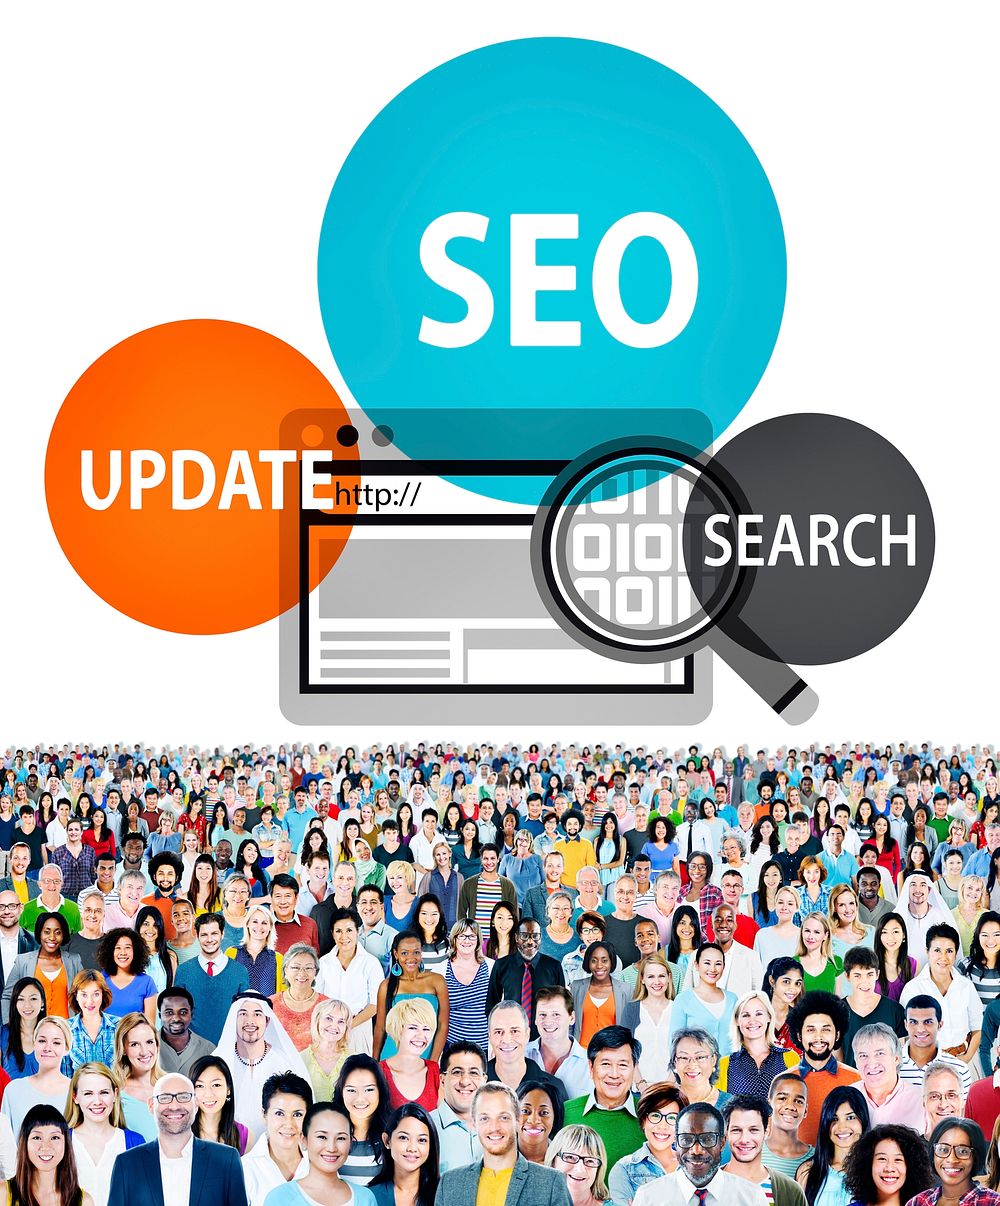 SEO graphic overlay on a huge crowd of people